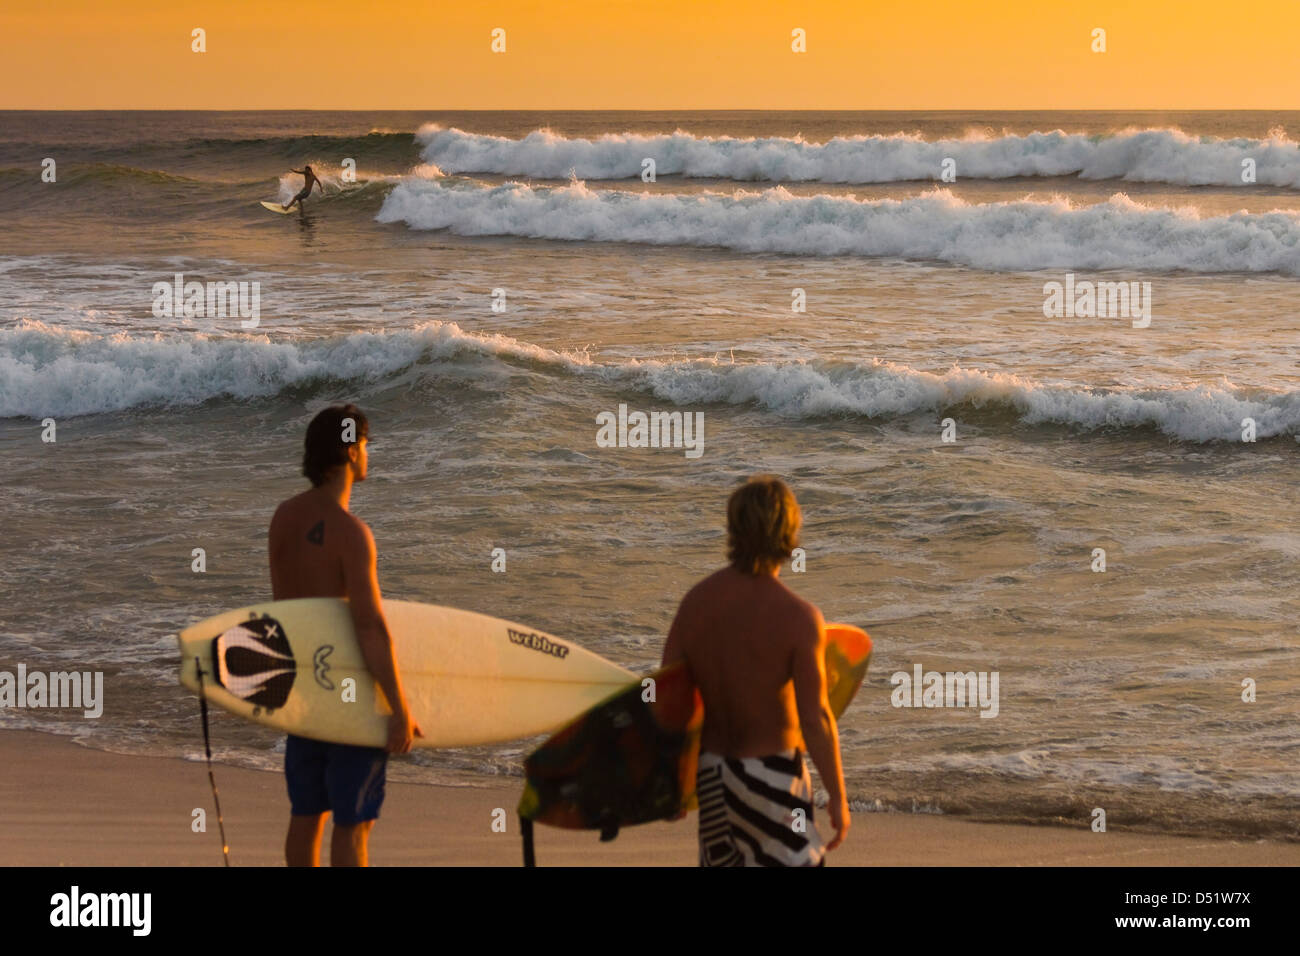 Surfers about to surf at sunset, Playa Guiones beach, Nosara, Nicoya Peninsula, Guanacaste Province, Costa Rica, Central America Stock Photo